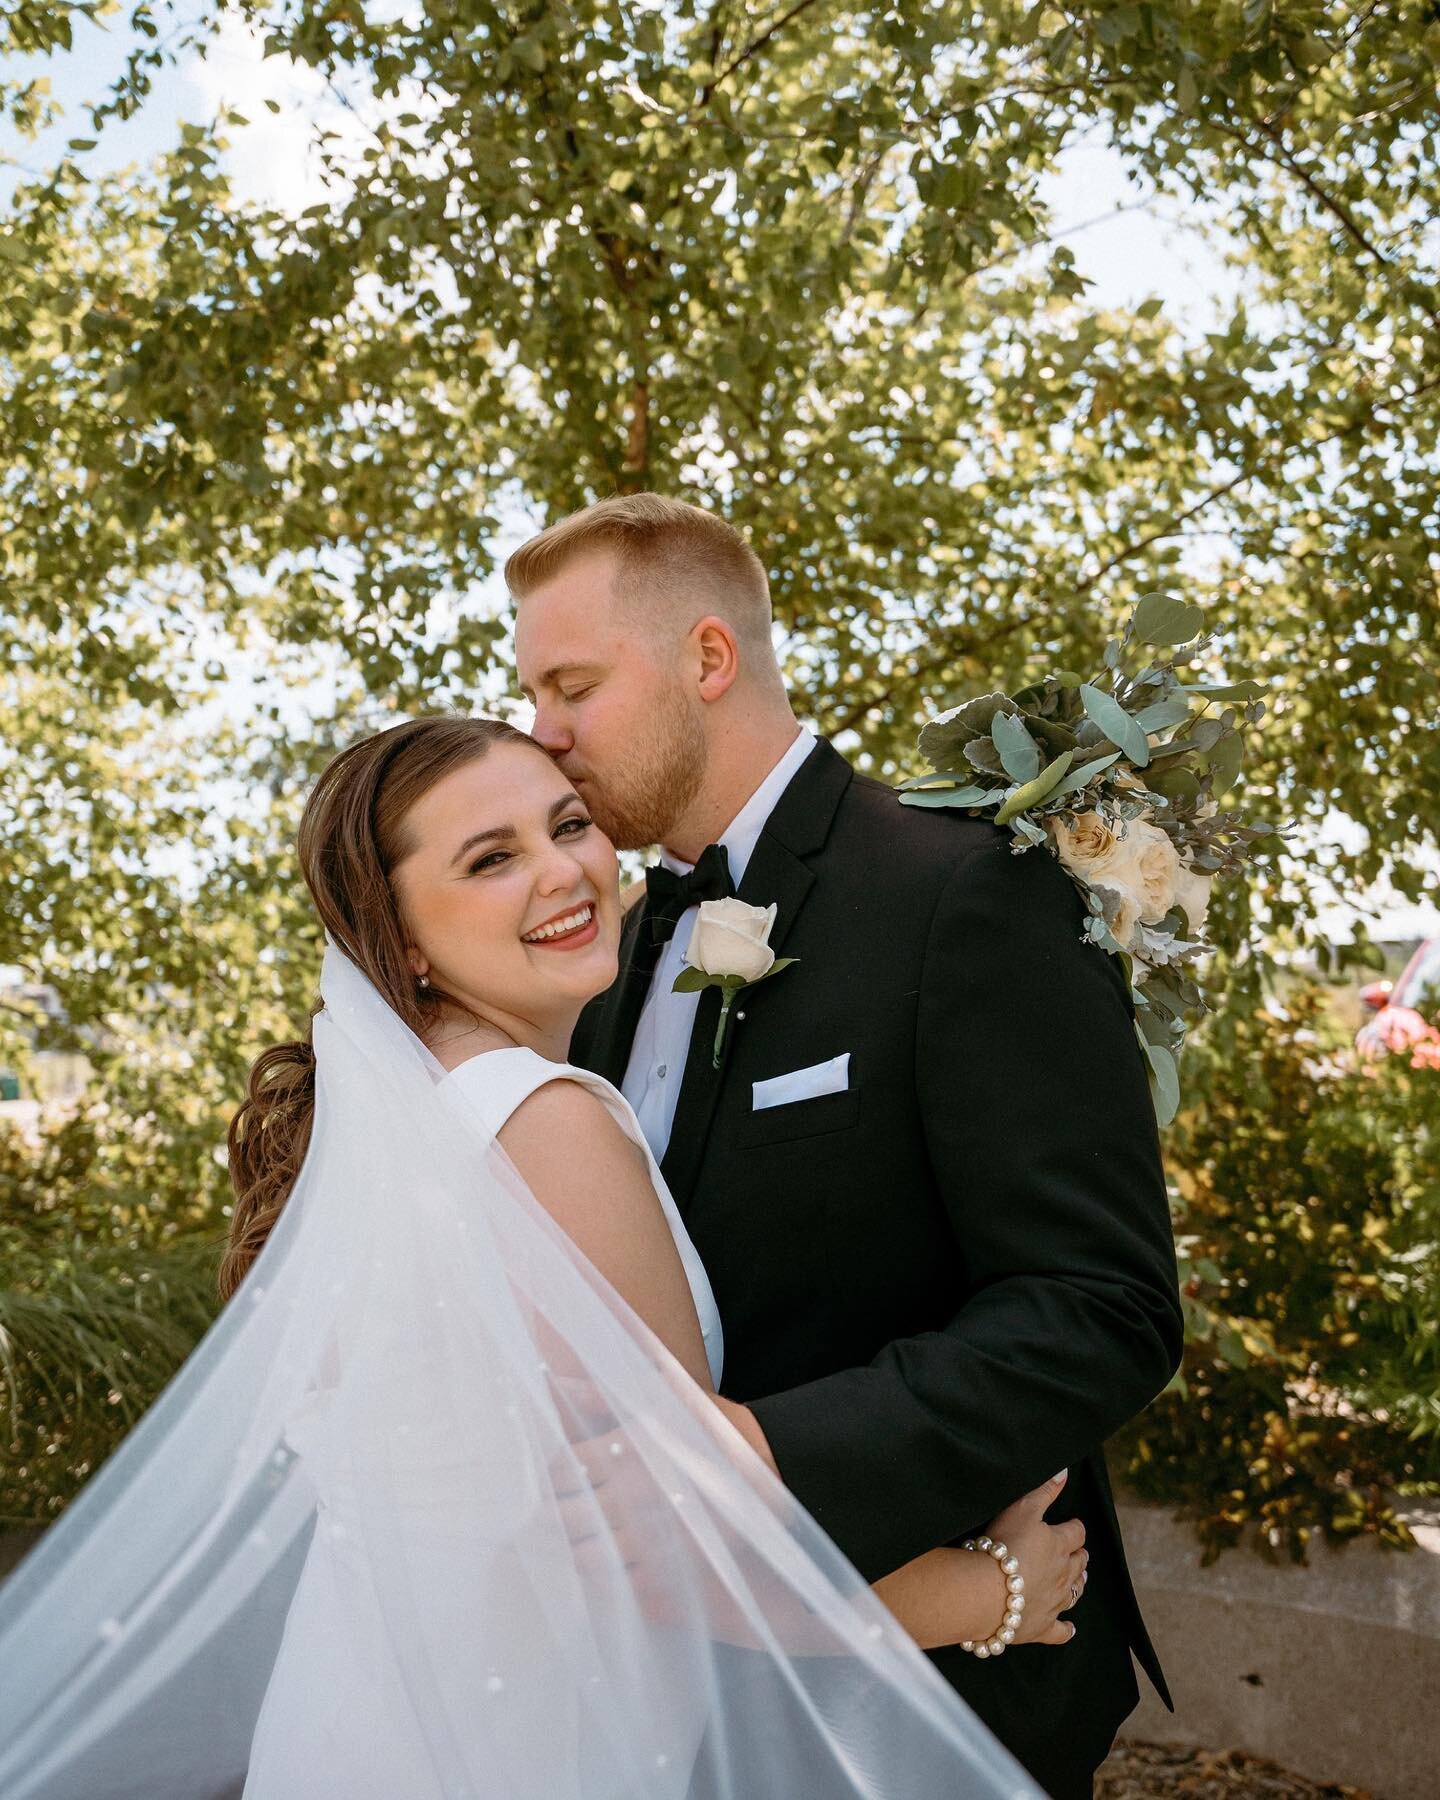 Two of my favorites from this gorgeous summer wedding&hellip; I can&rsquo;t believe Bailey + Nick have been married a month already!! 
&bull;
&bull;
&bull;
#allisonkleinphotography #photographer #omahaweddingphotography #omahawedding #omaha #nebraska